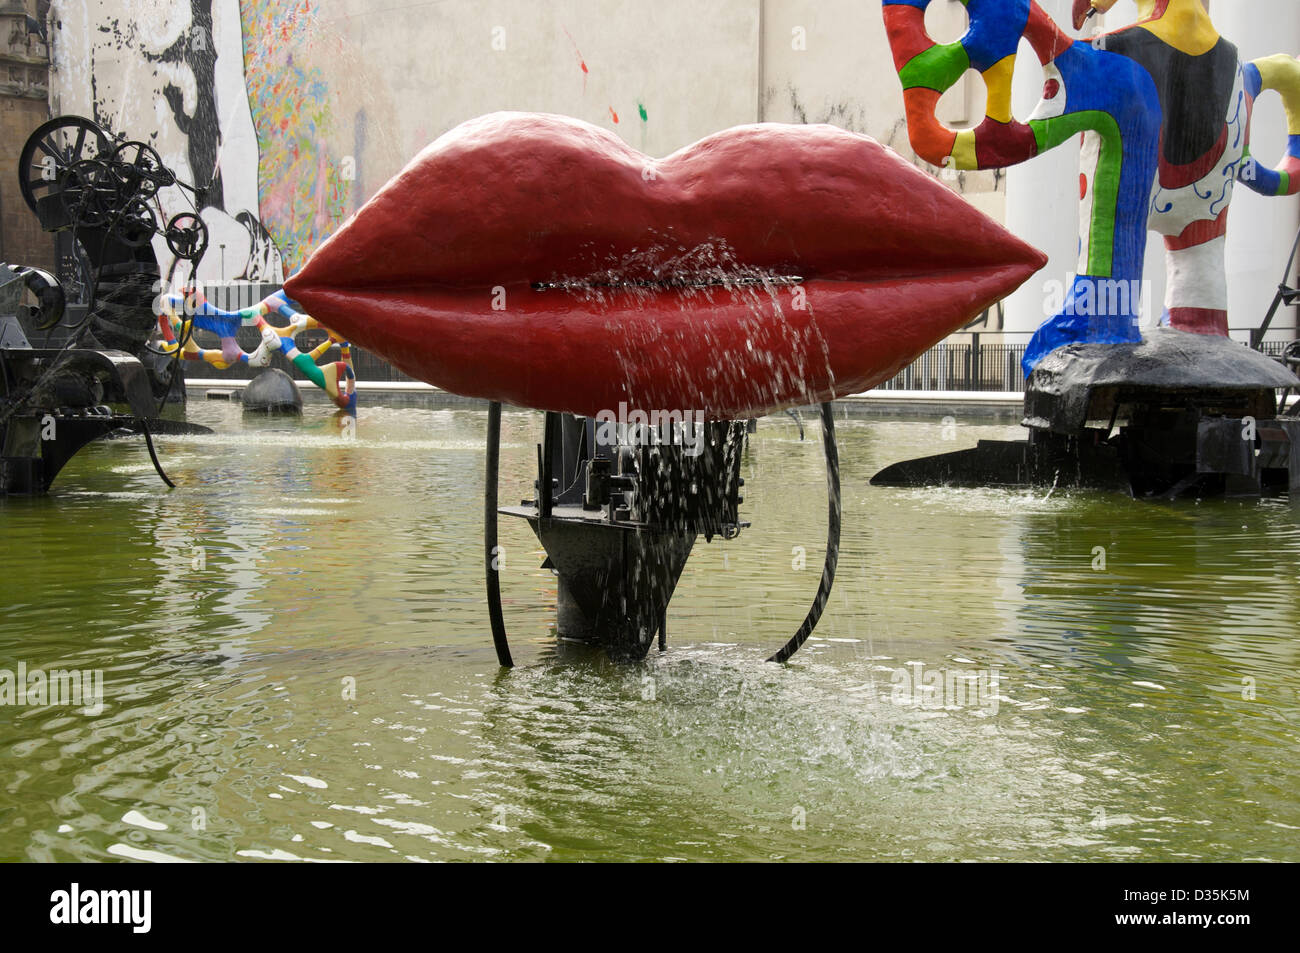 This huge pair of red lips called L’Amour by artists Jean Tinguely and Niki de Saint Phalle, is part of the Stravinsky fountain in Paris, France. Stock Photo